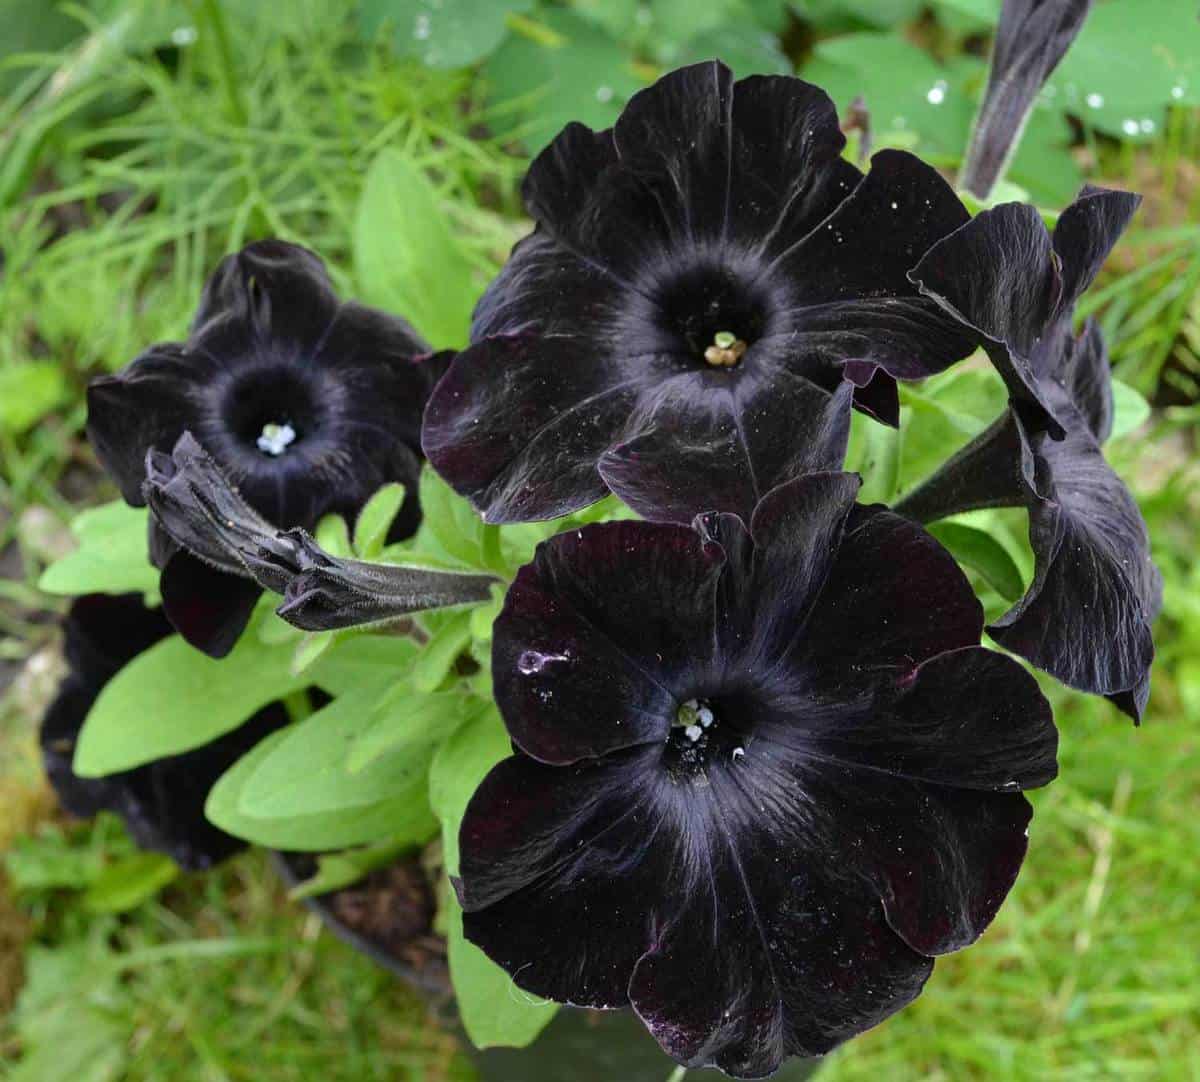 The black petals are tinged with violet hues that shimmer when sunlight is directly shone on them.